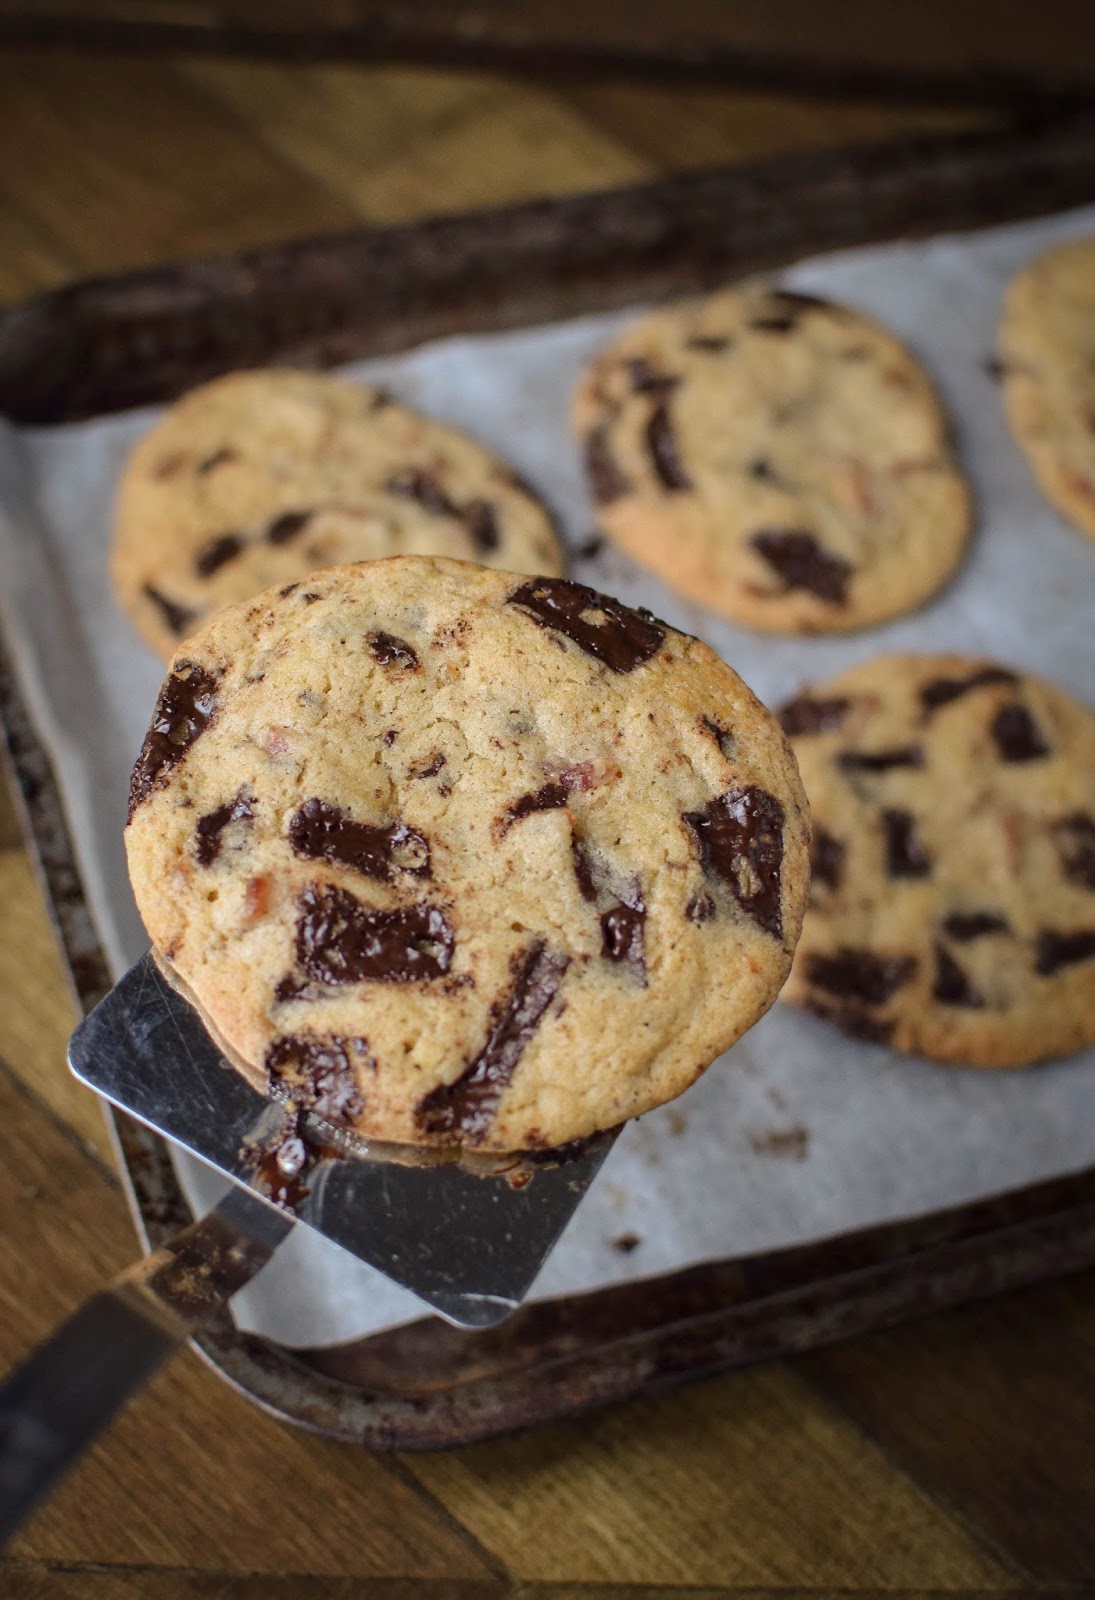 Forget about the usual boring pair of socks, treat your dad to these beer and bacon cookies this Fathers Day.